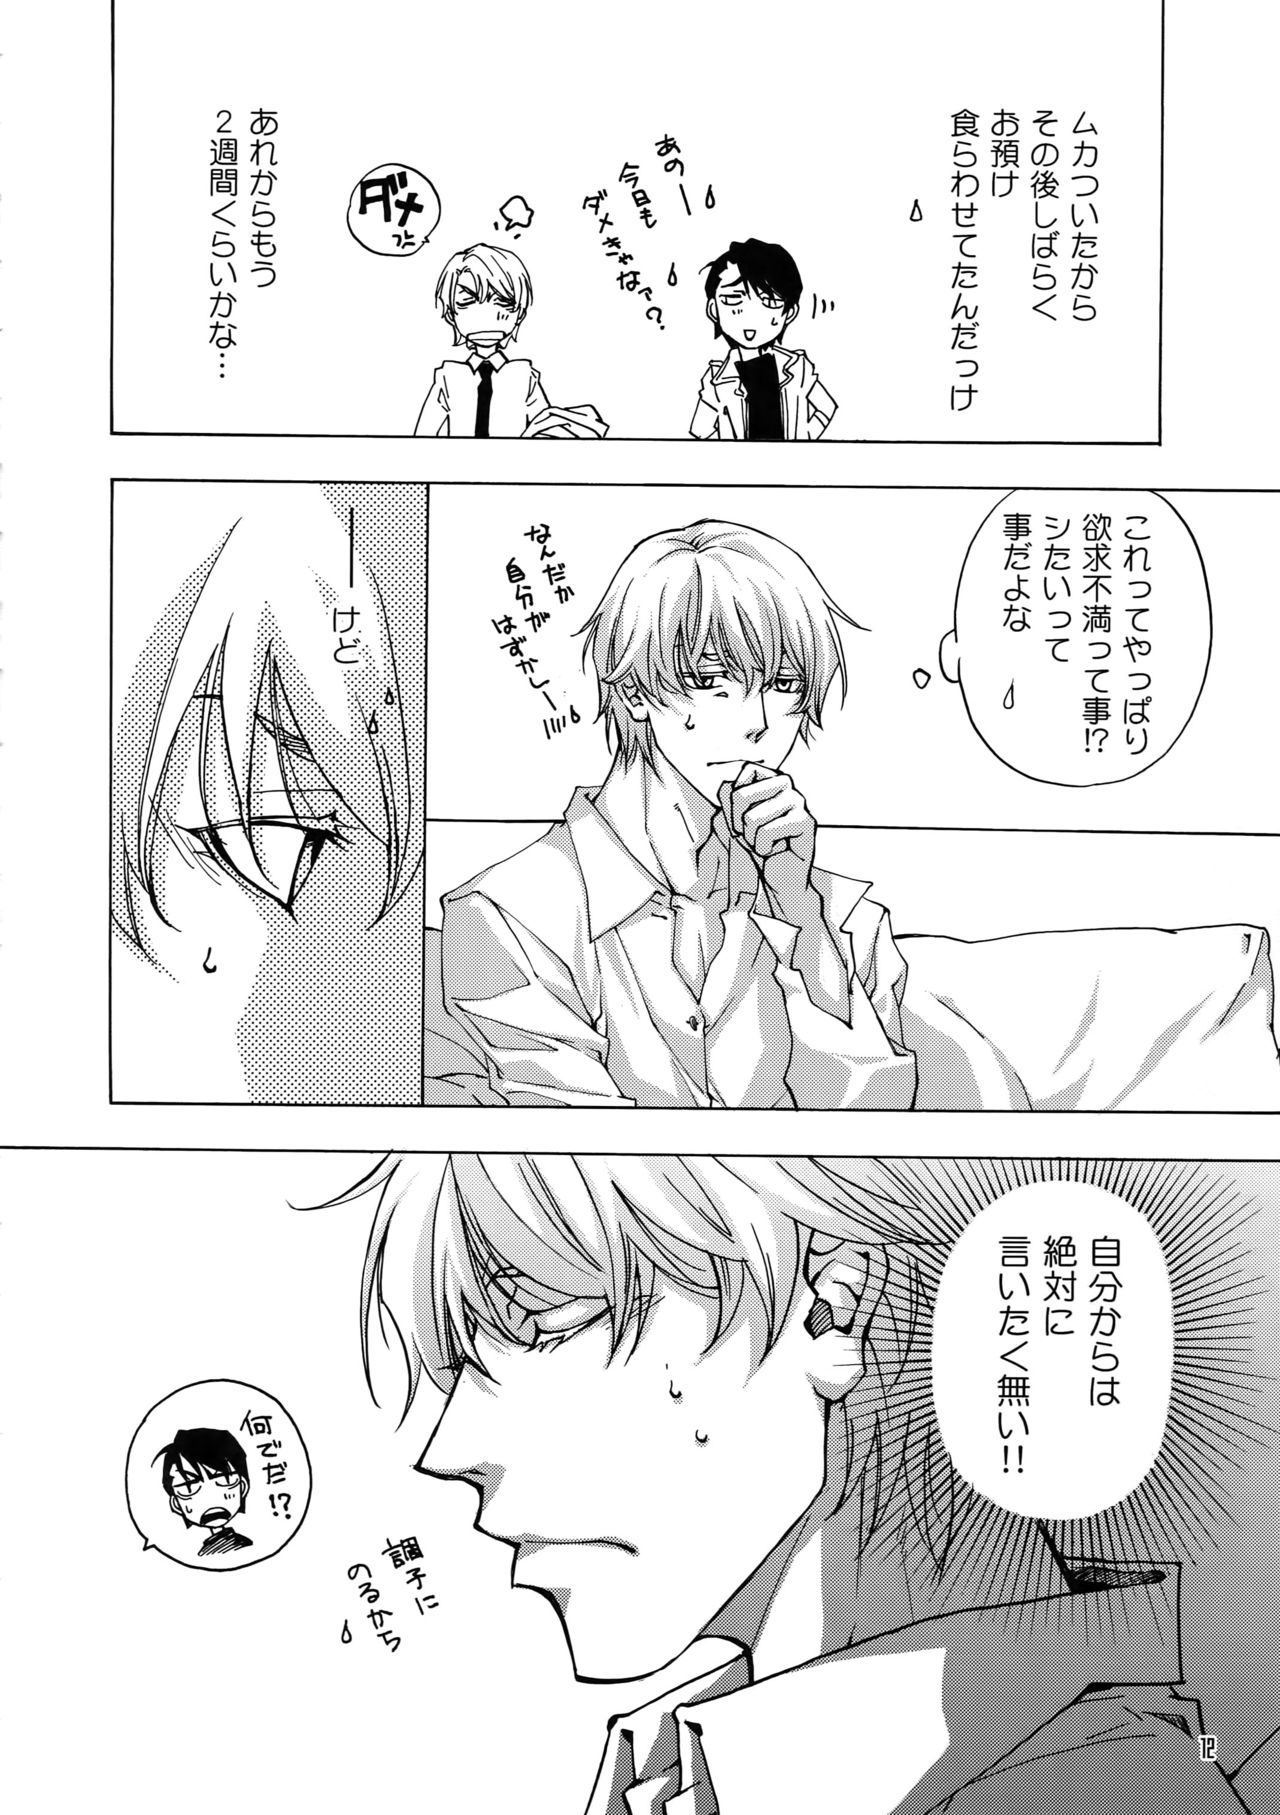 [East End Club (Matoh Sanami)] BACK STAGE PASS 10 page 9 full